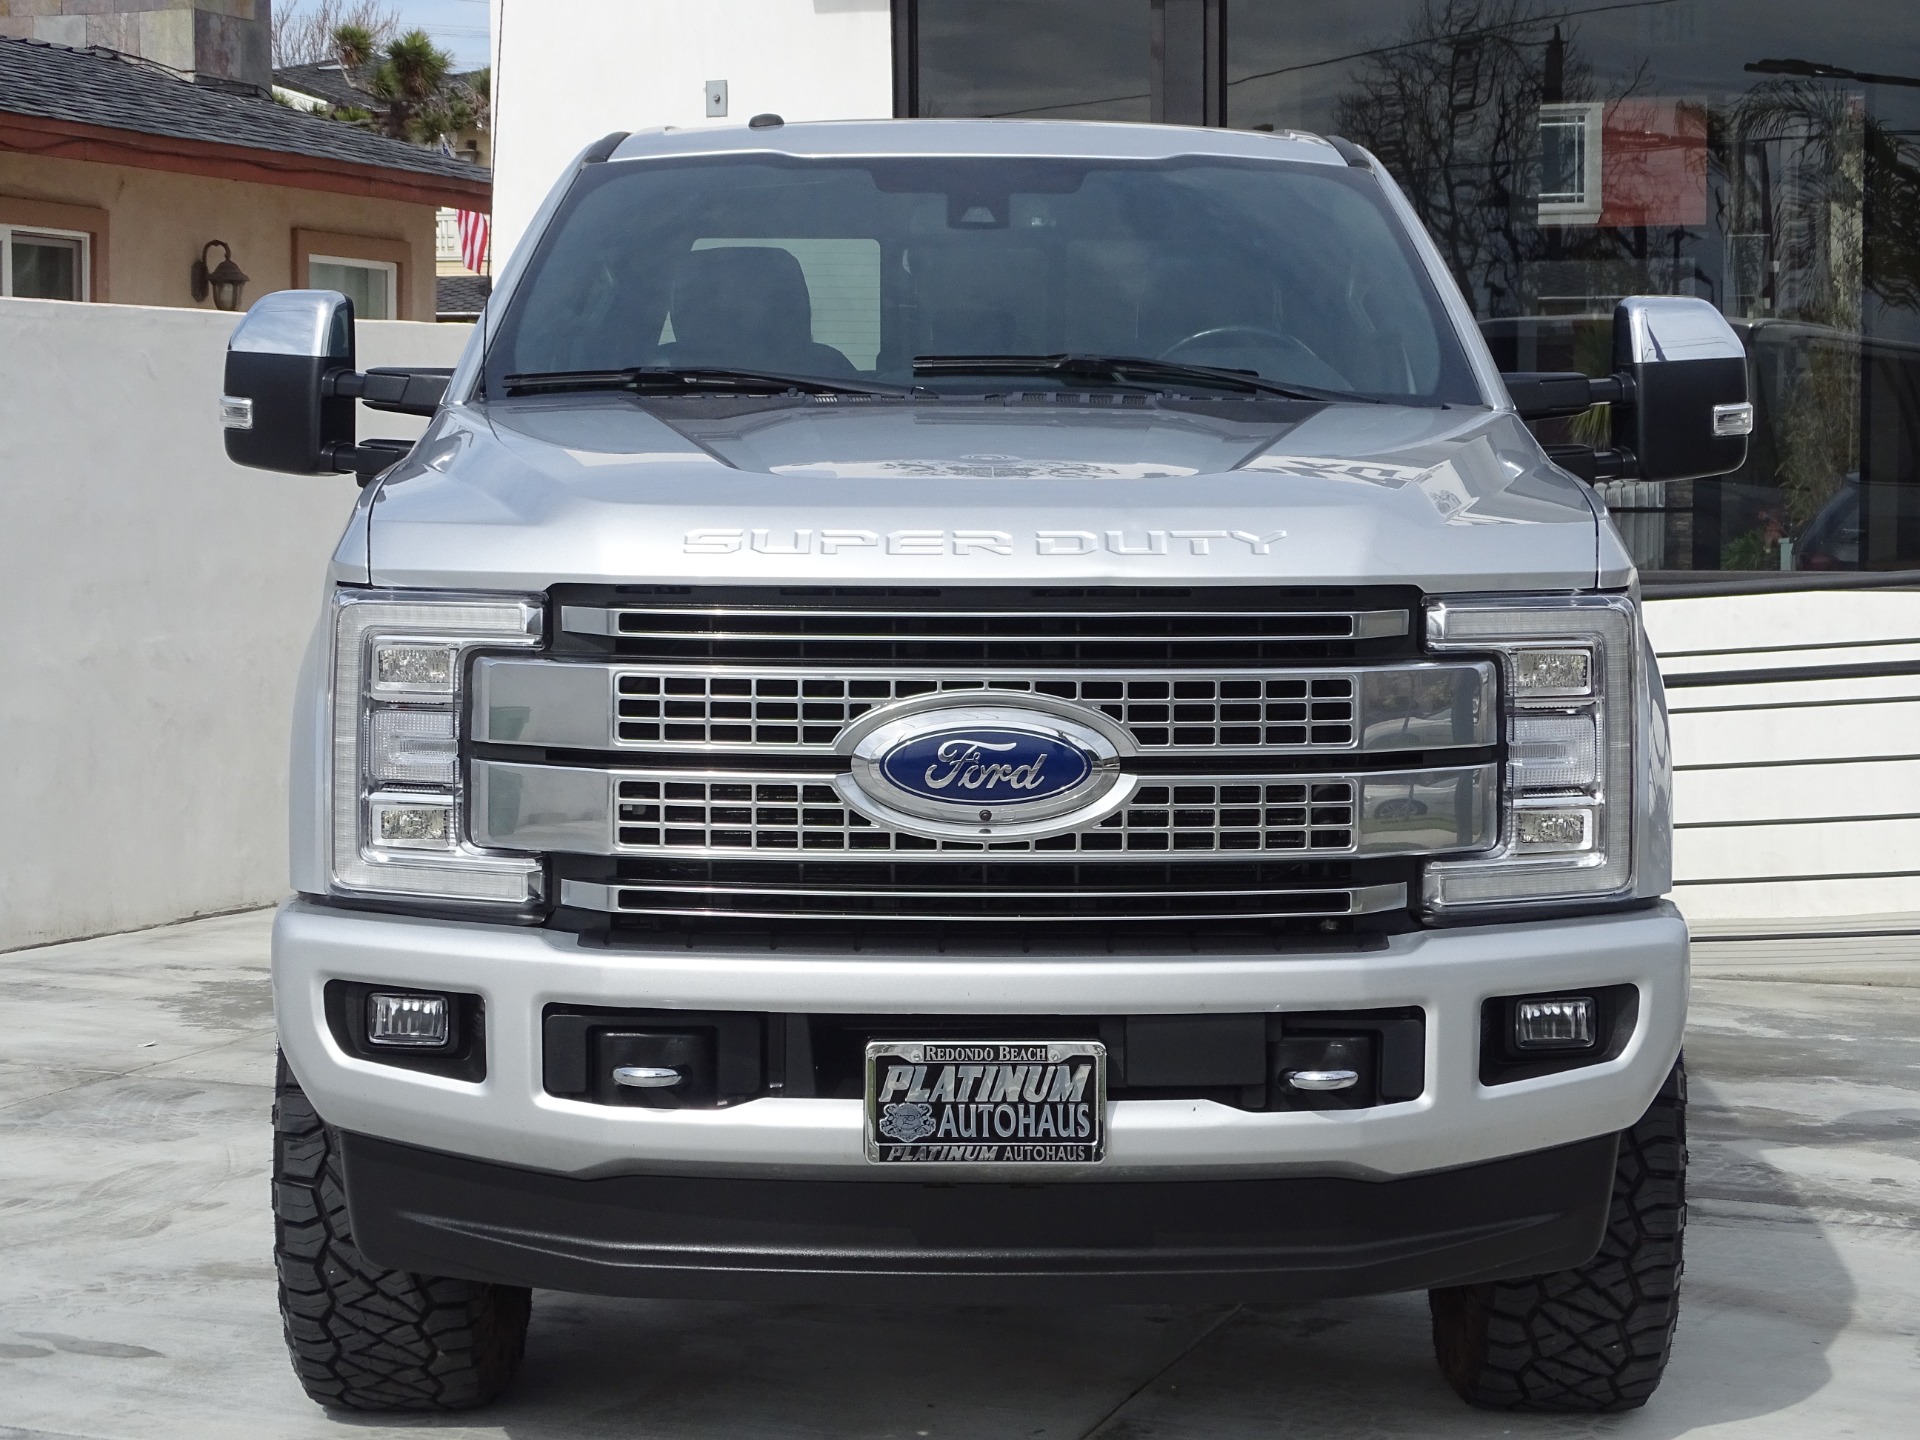 2018 Ford F-250 Super Duty Platinum Ultimate *** EVERY OPTION ** Stock #  6309A for sale near Redondo Beach, CA | CA Ford Dealer